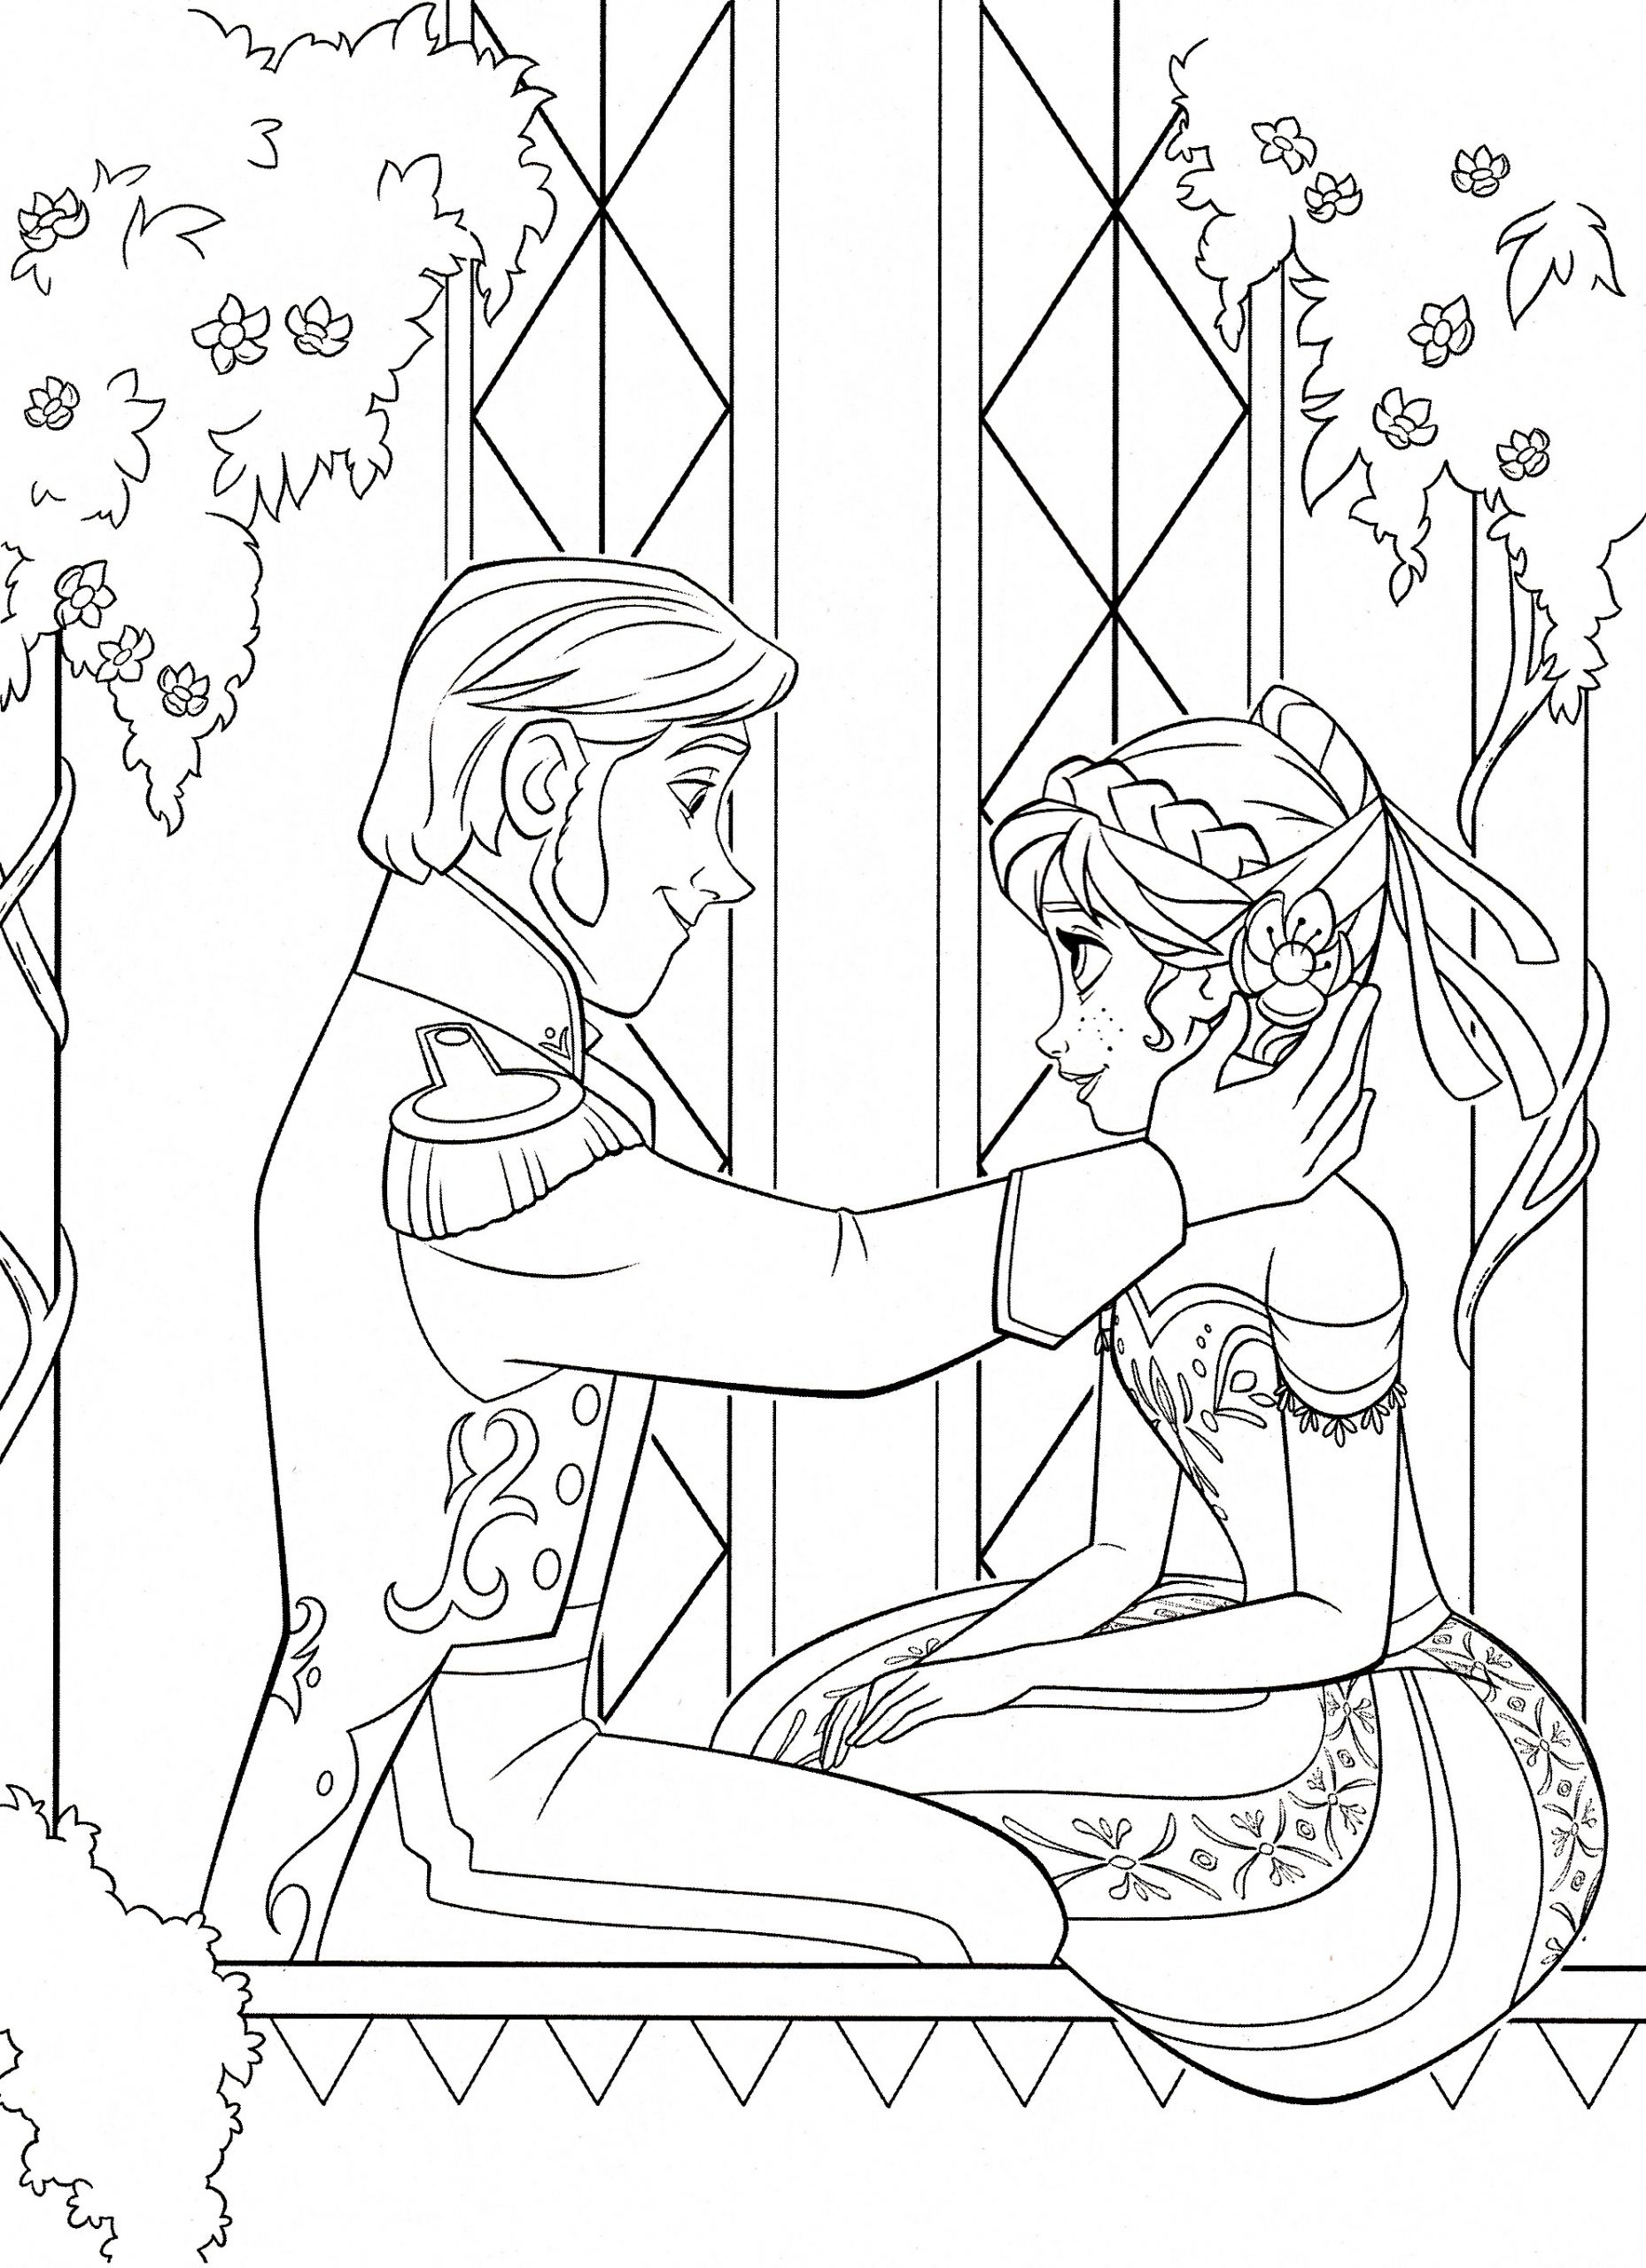 Printable Coloring Pages Frozen
 Disney’s Frozen Colouring Pages